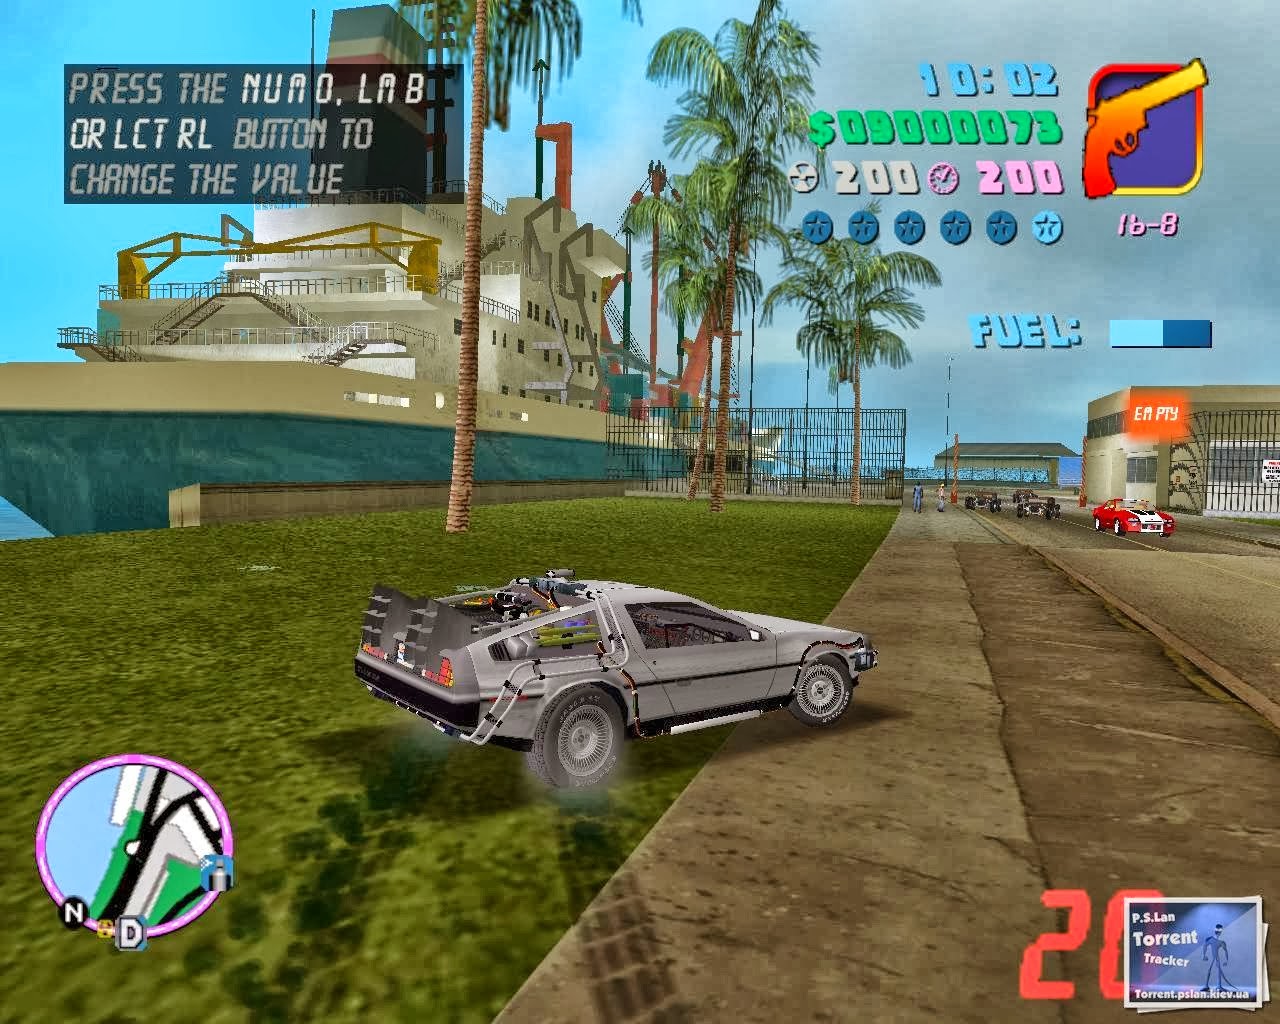 GTA vice City back to the Future Hill Valley. ГТА вай Сити Делюкс 2005. Grand Theft auto vice City диск ПК. GTA вай Сити Делюкс. Играть гта вайс